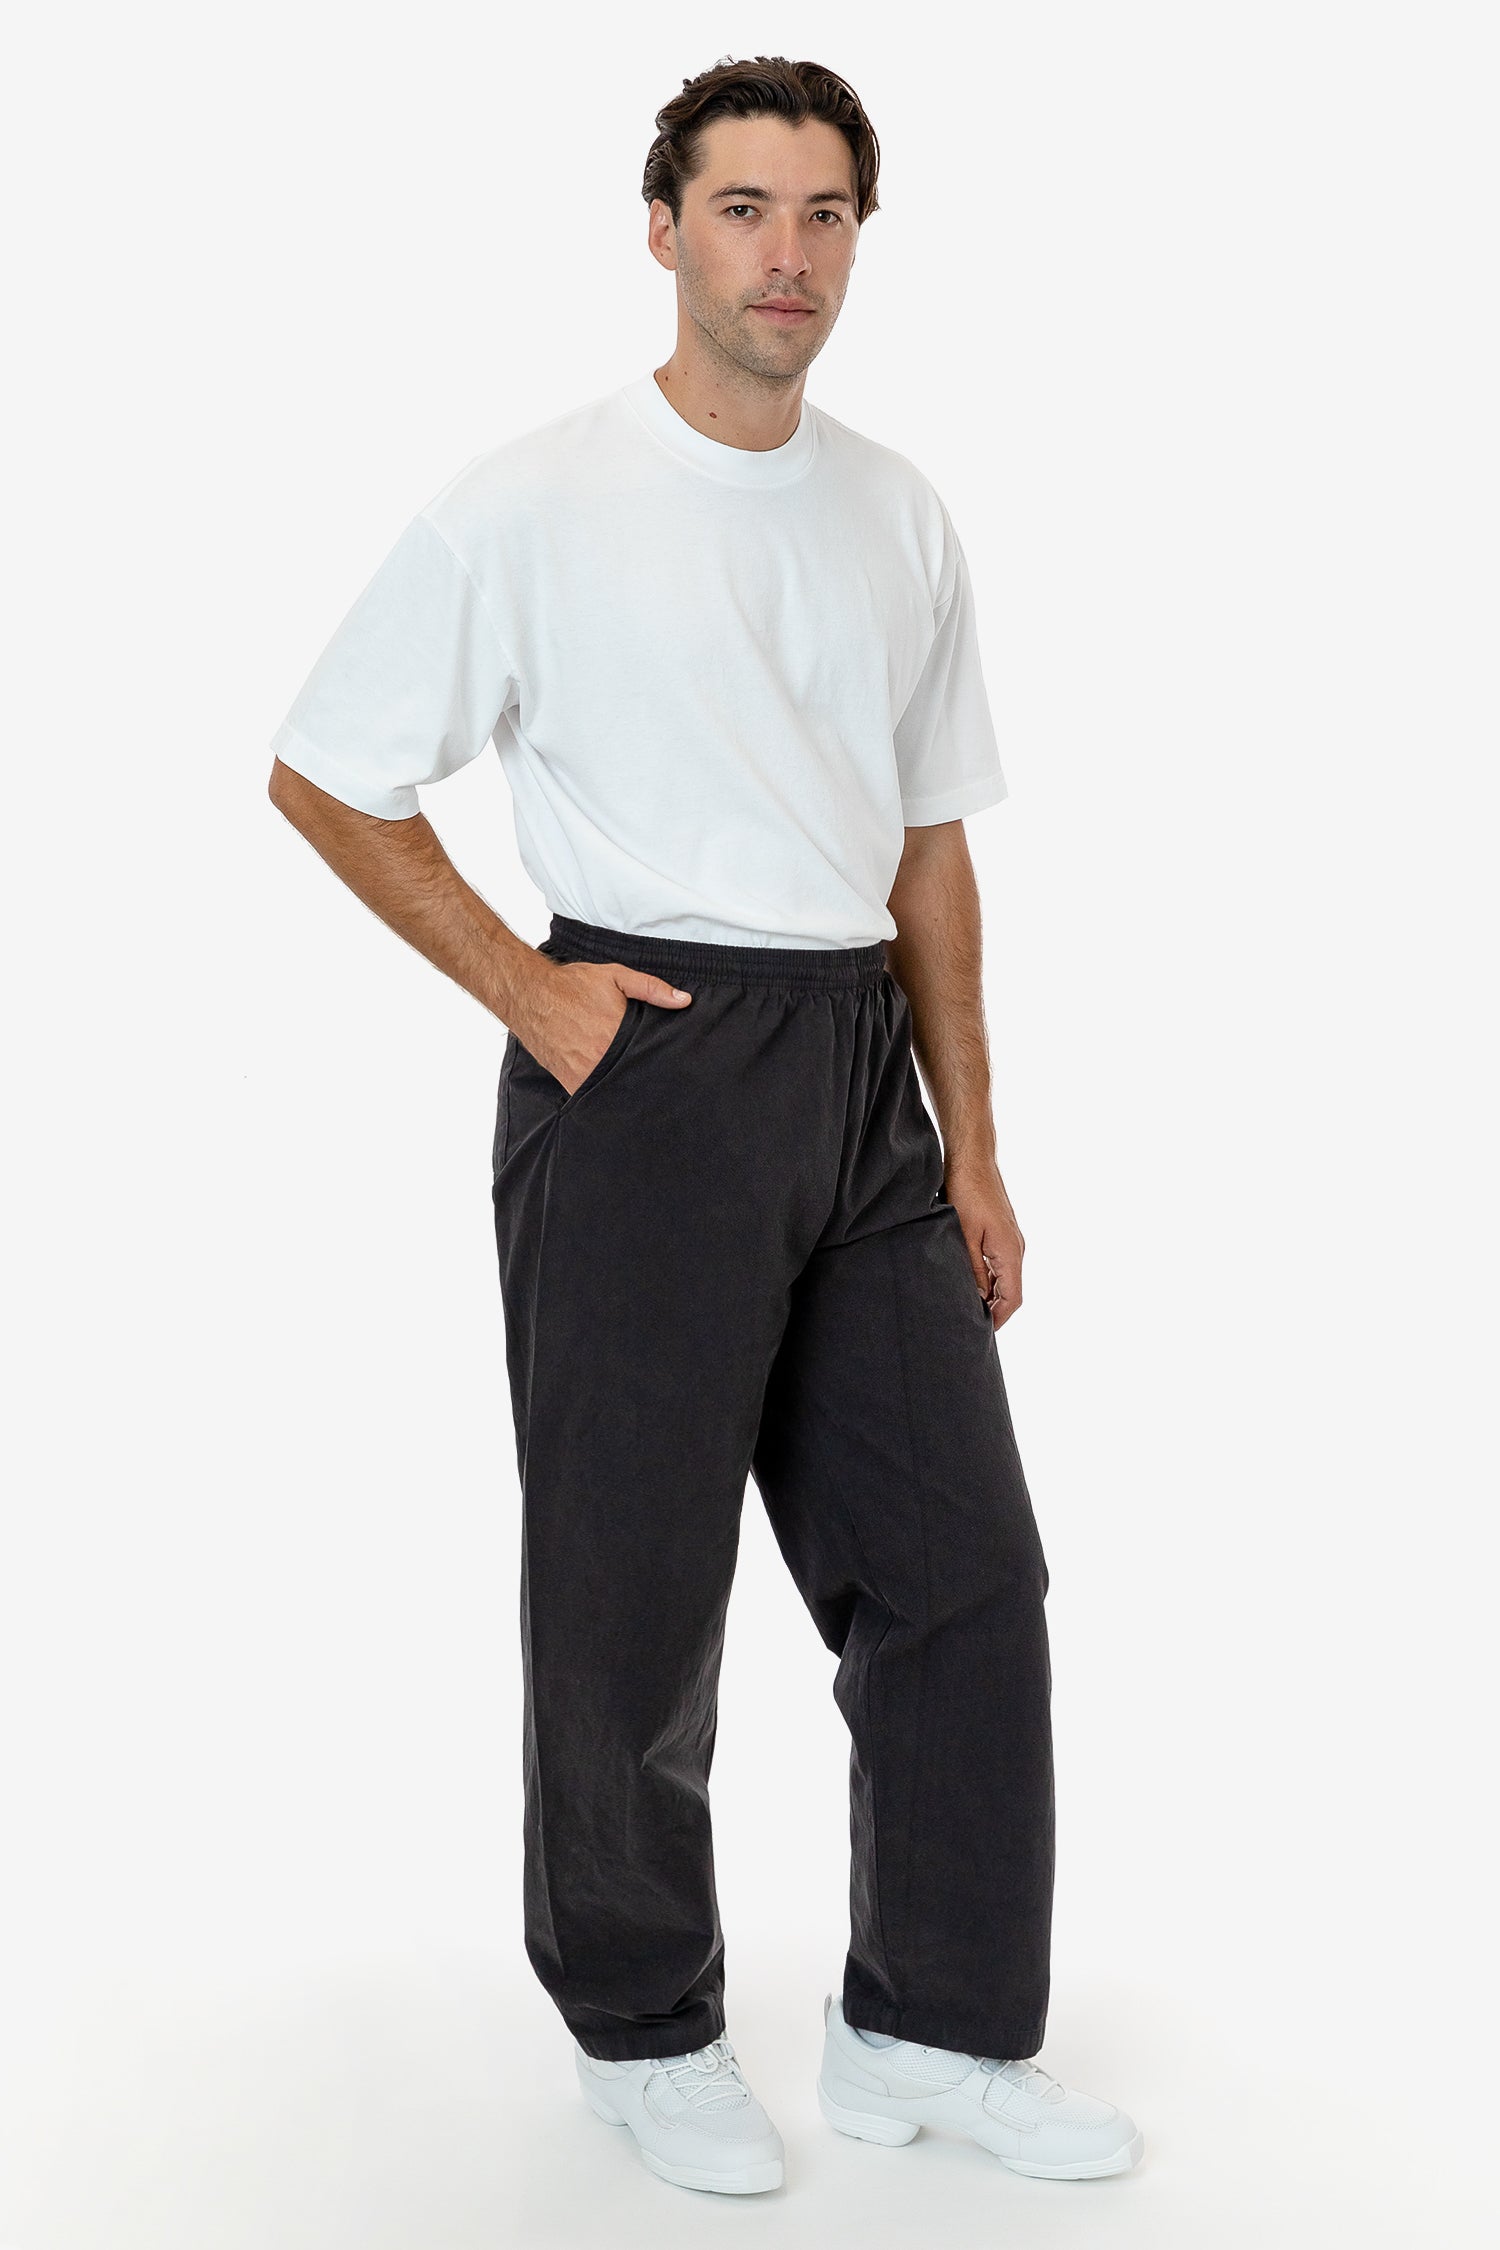 Men's 100% Cotton Pants Woven and Dyed in Black from Peru - Washed Black